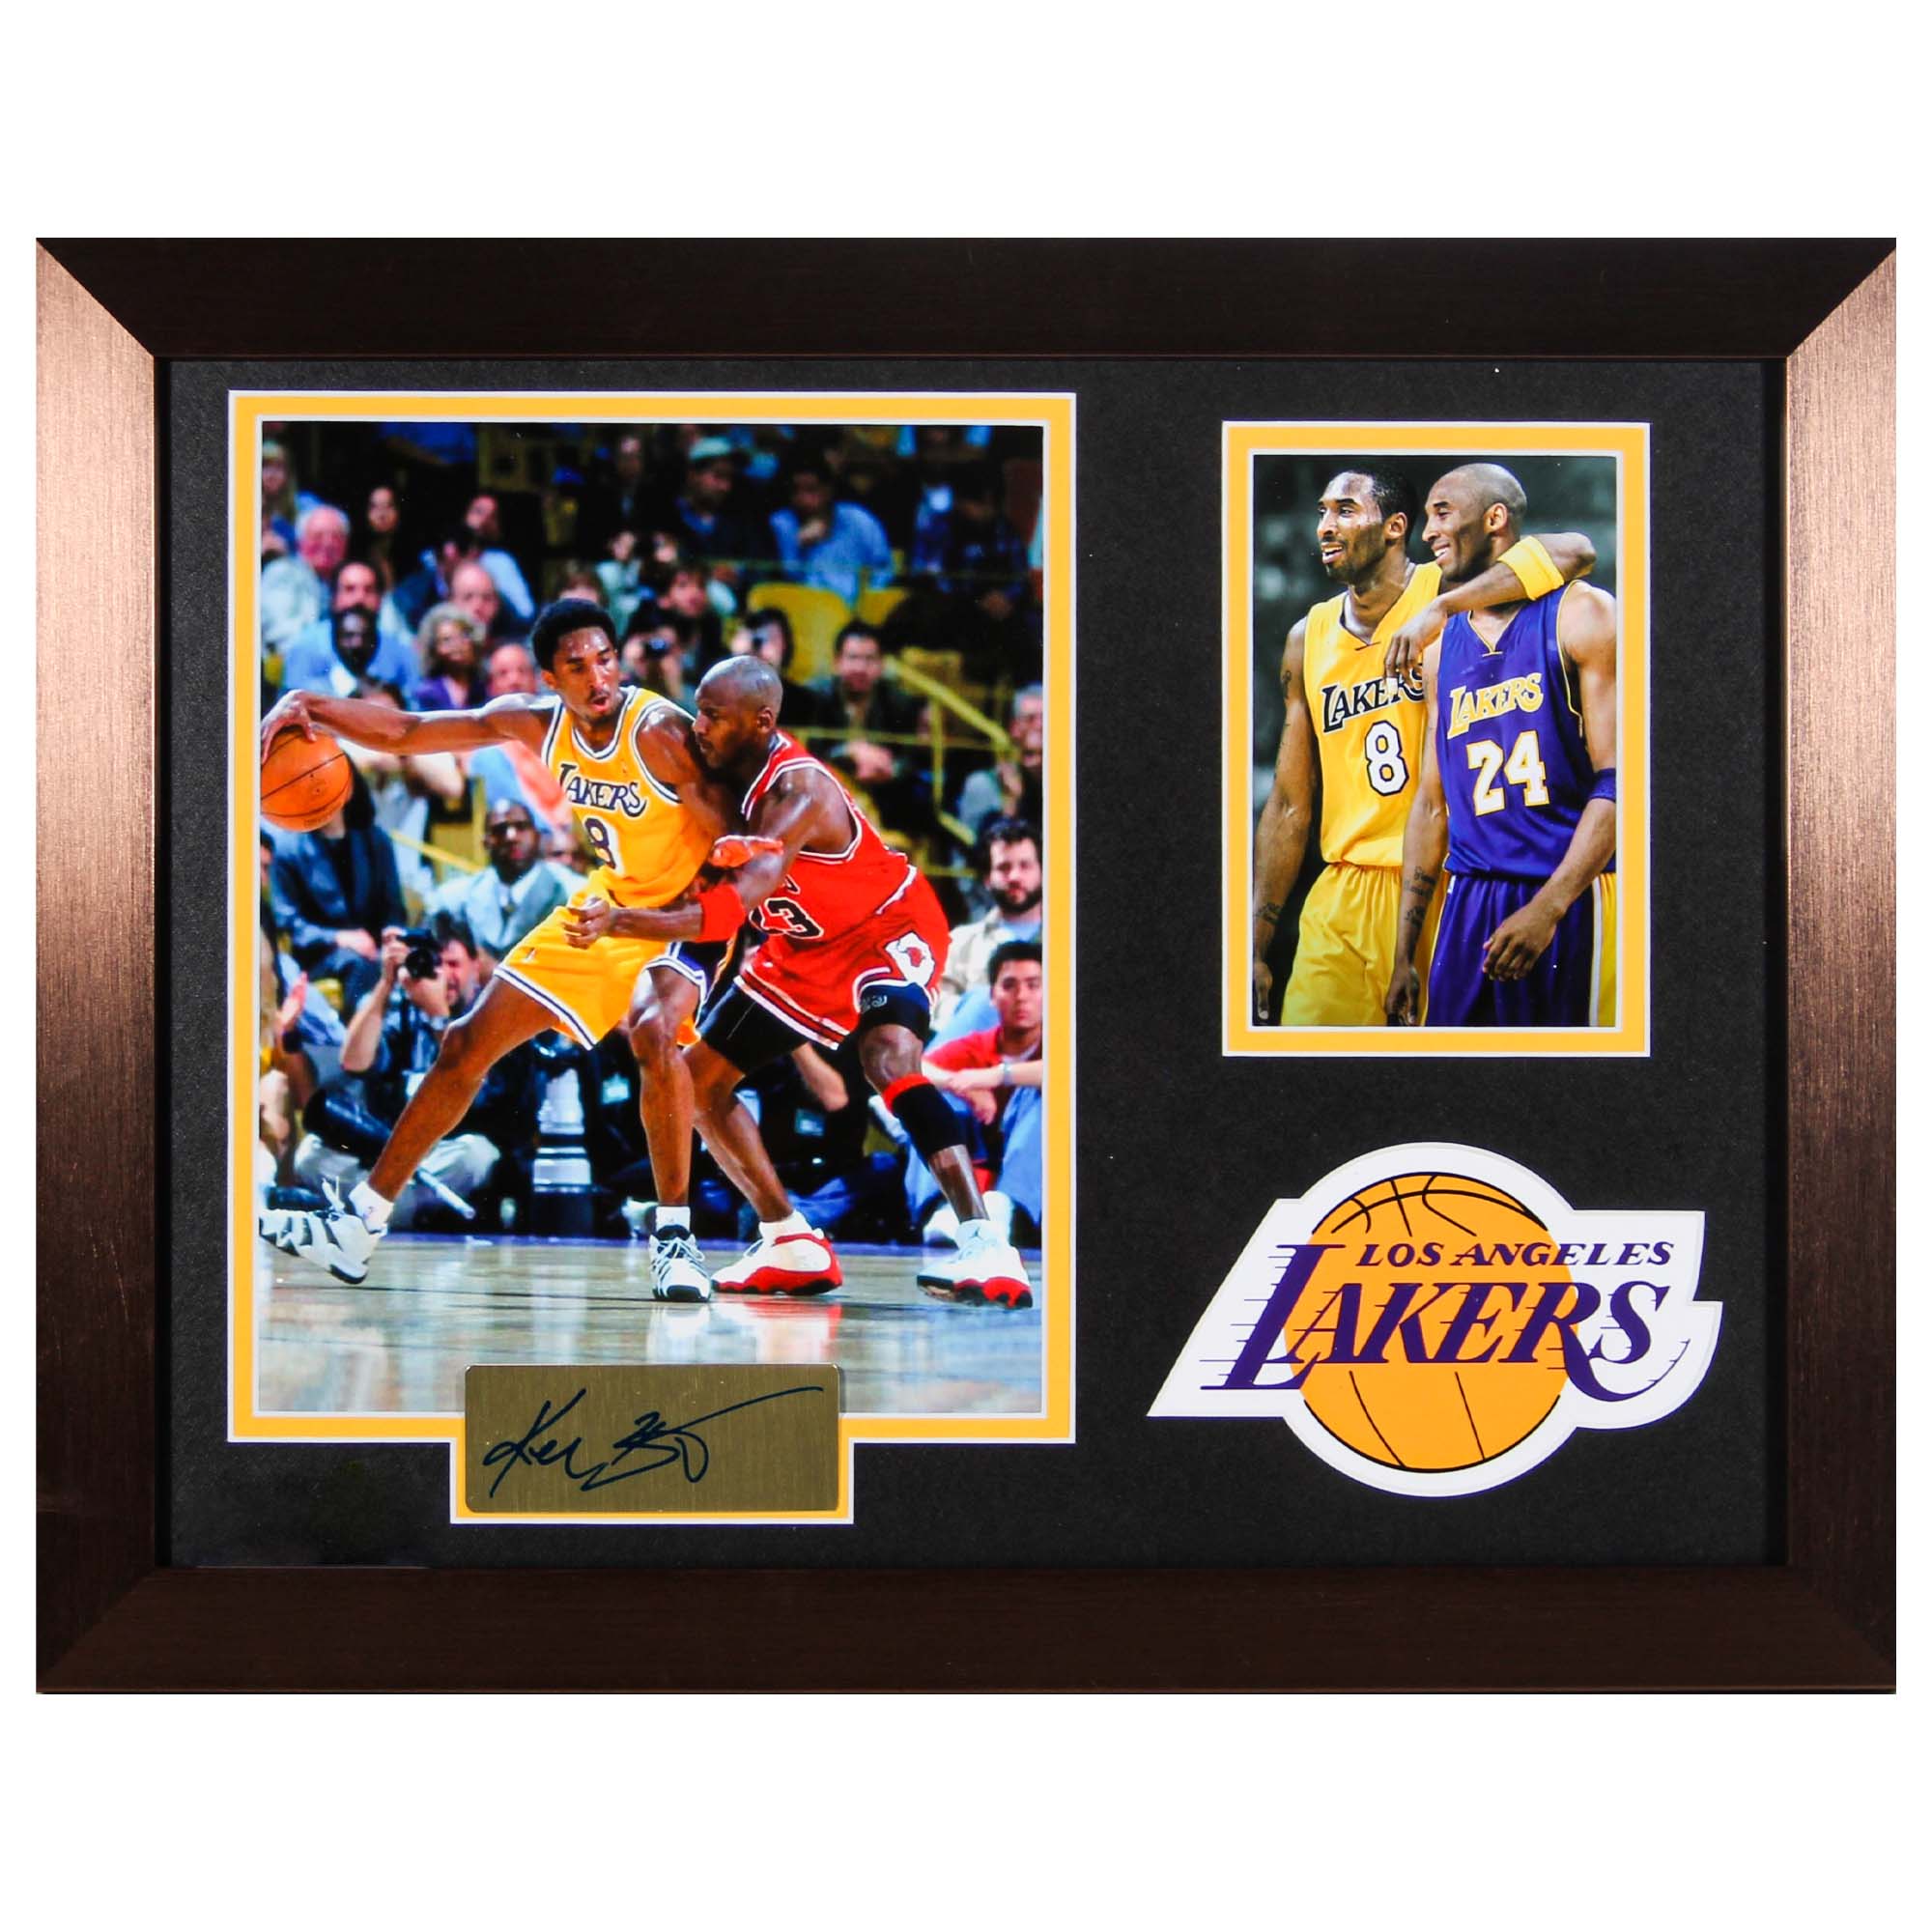 Autographed signed Kobe Bryant Jersey - collectibles - by owner